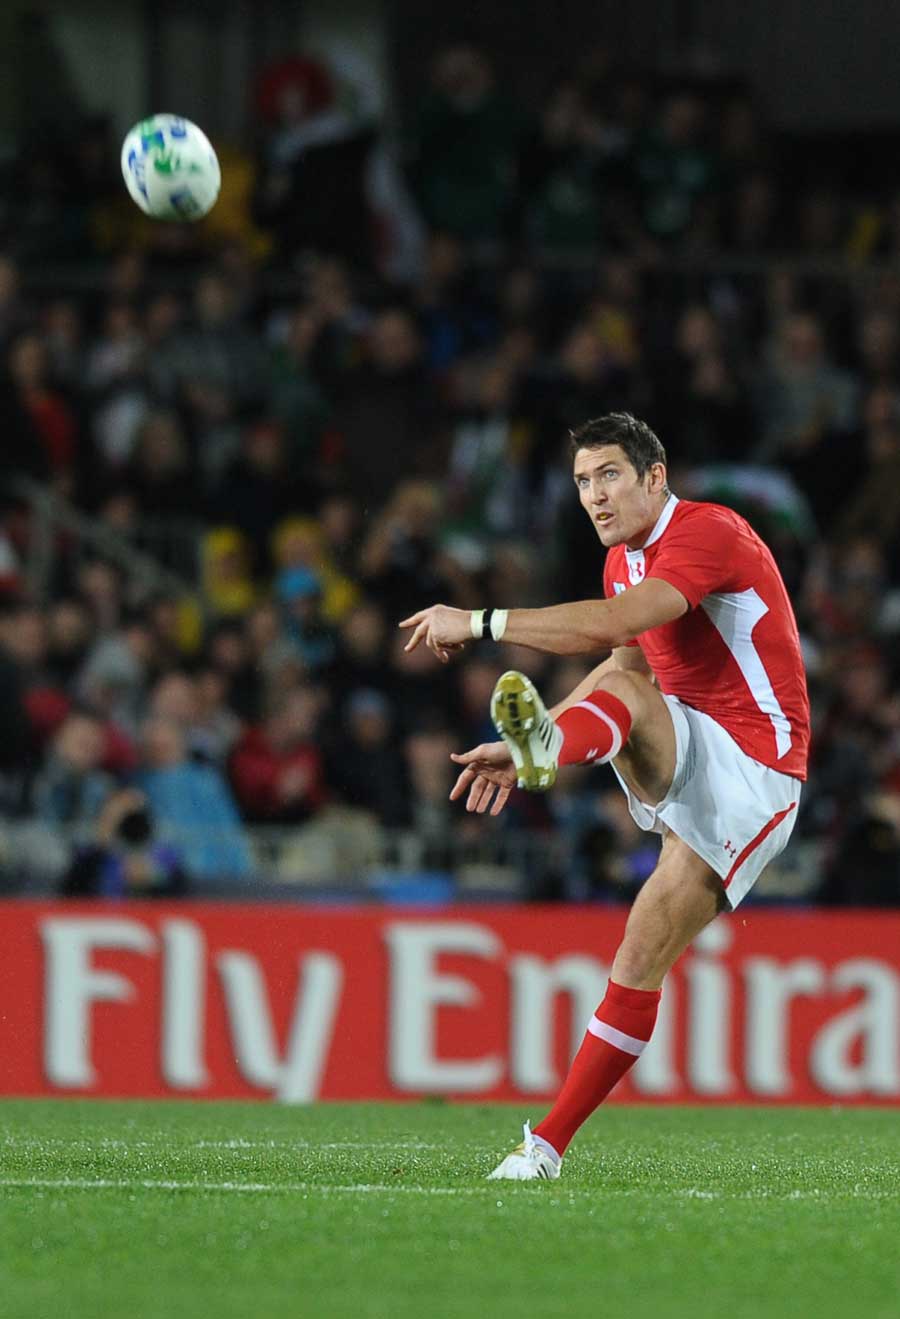 Wales fly-half James Hook lands an early penalty